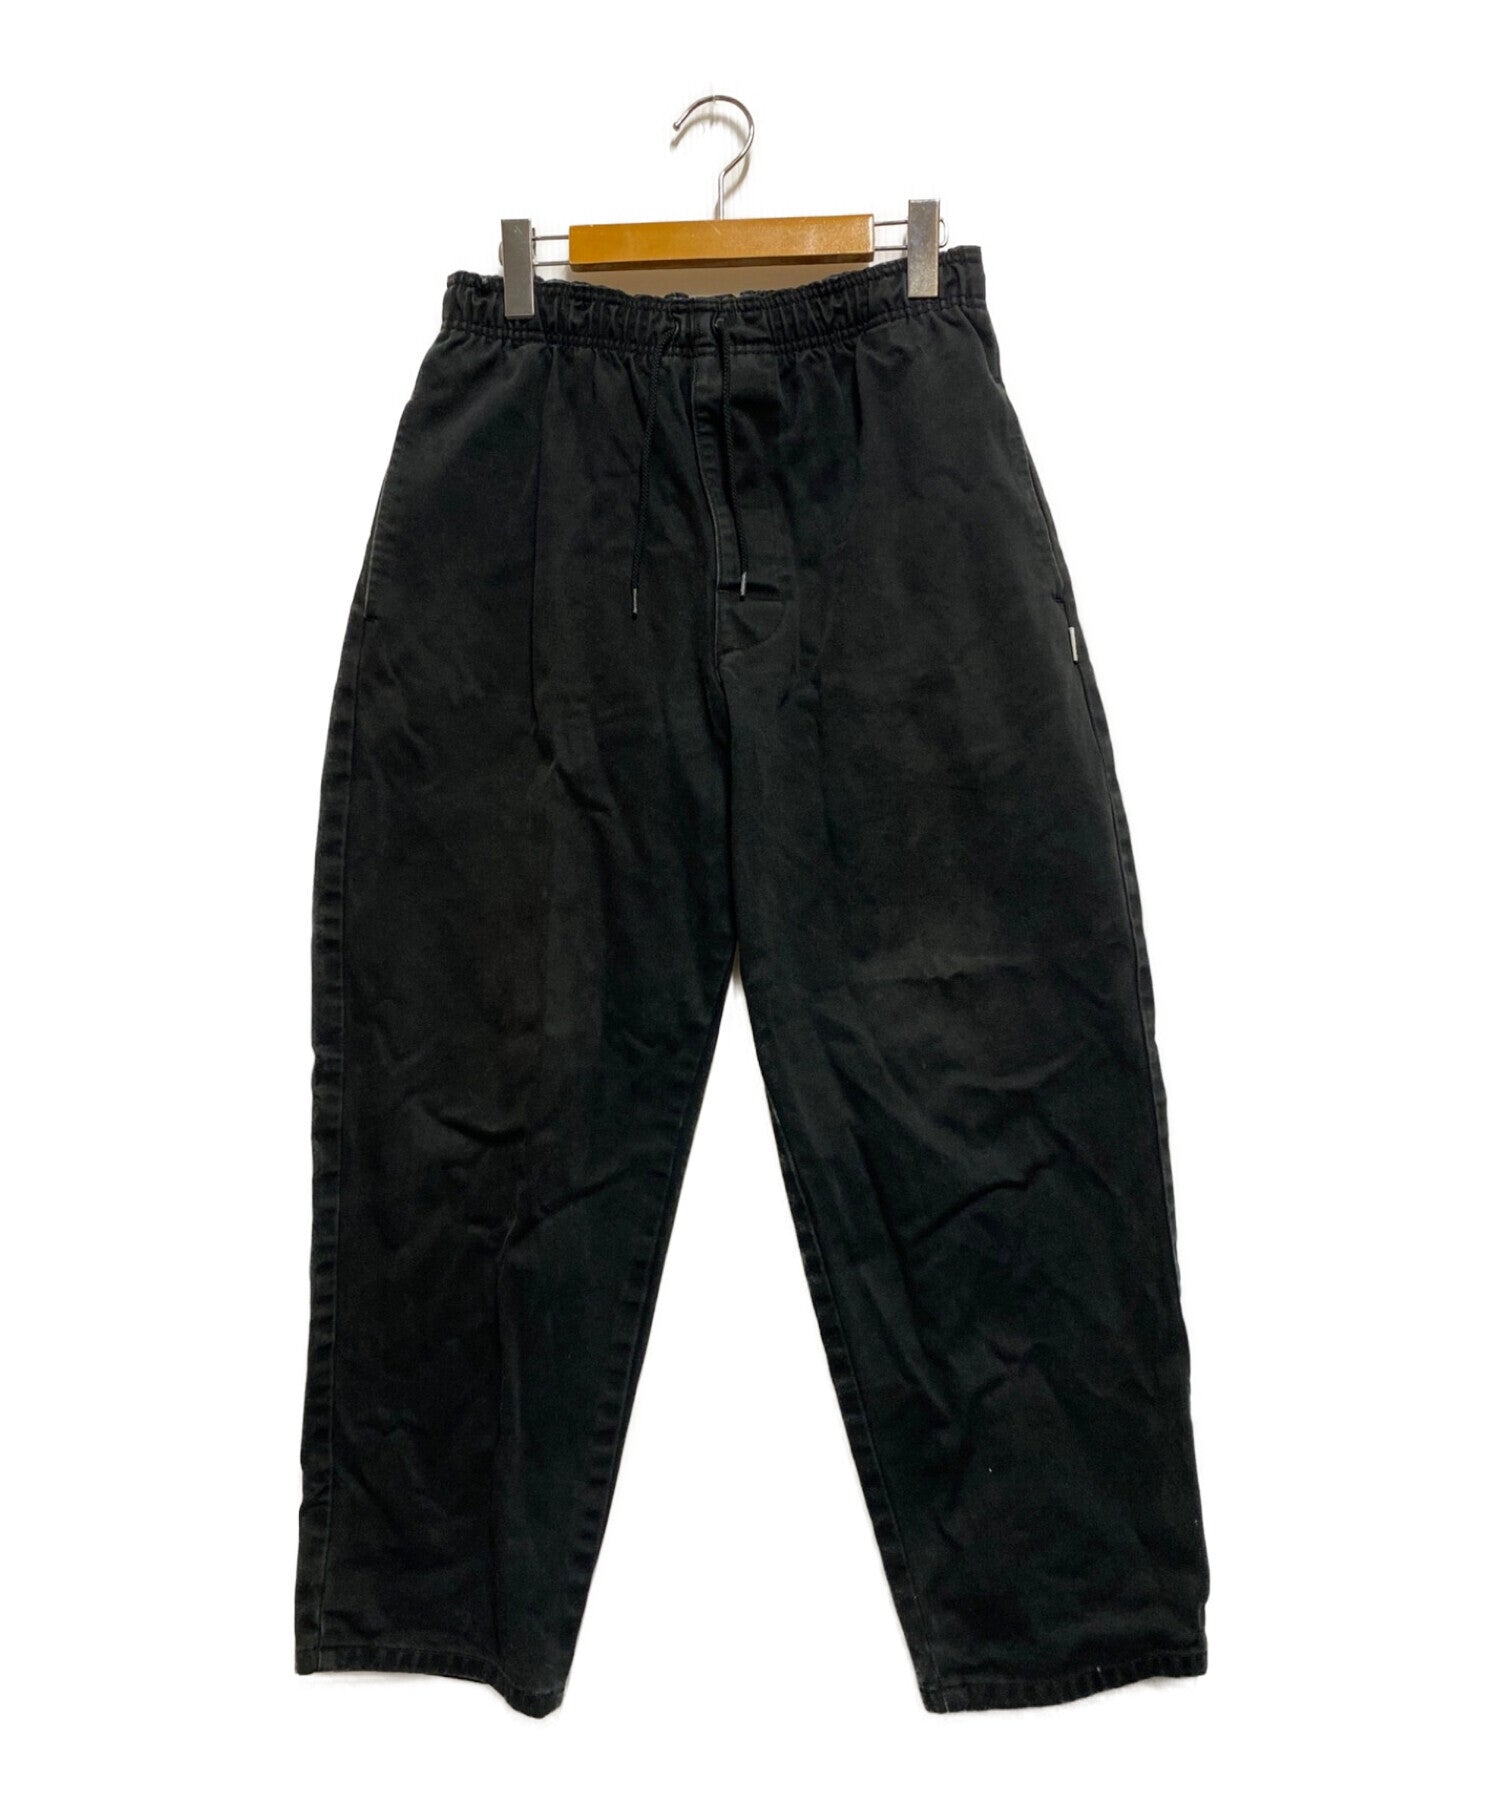 WTAPS seagull 03 trousers cotton twill 212wvdt-ptm08